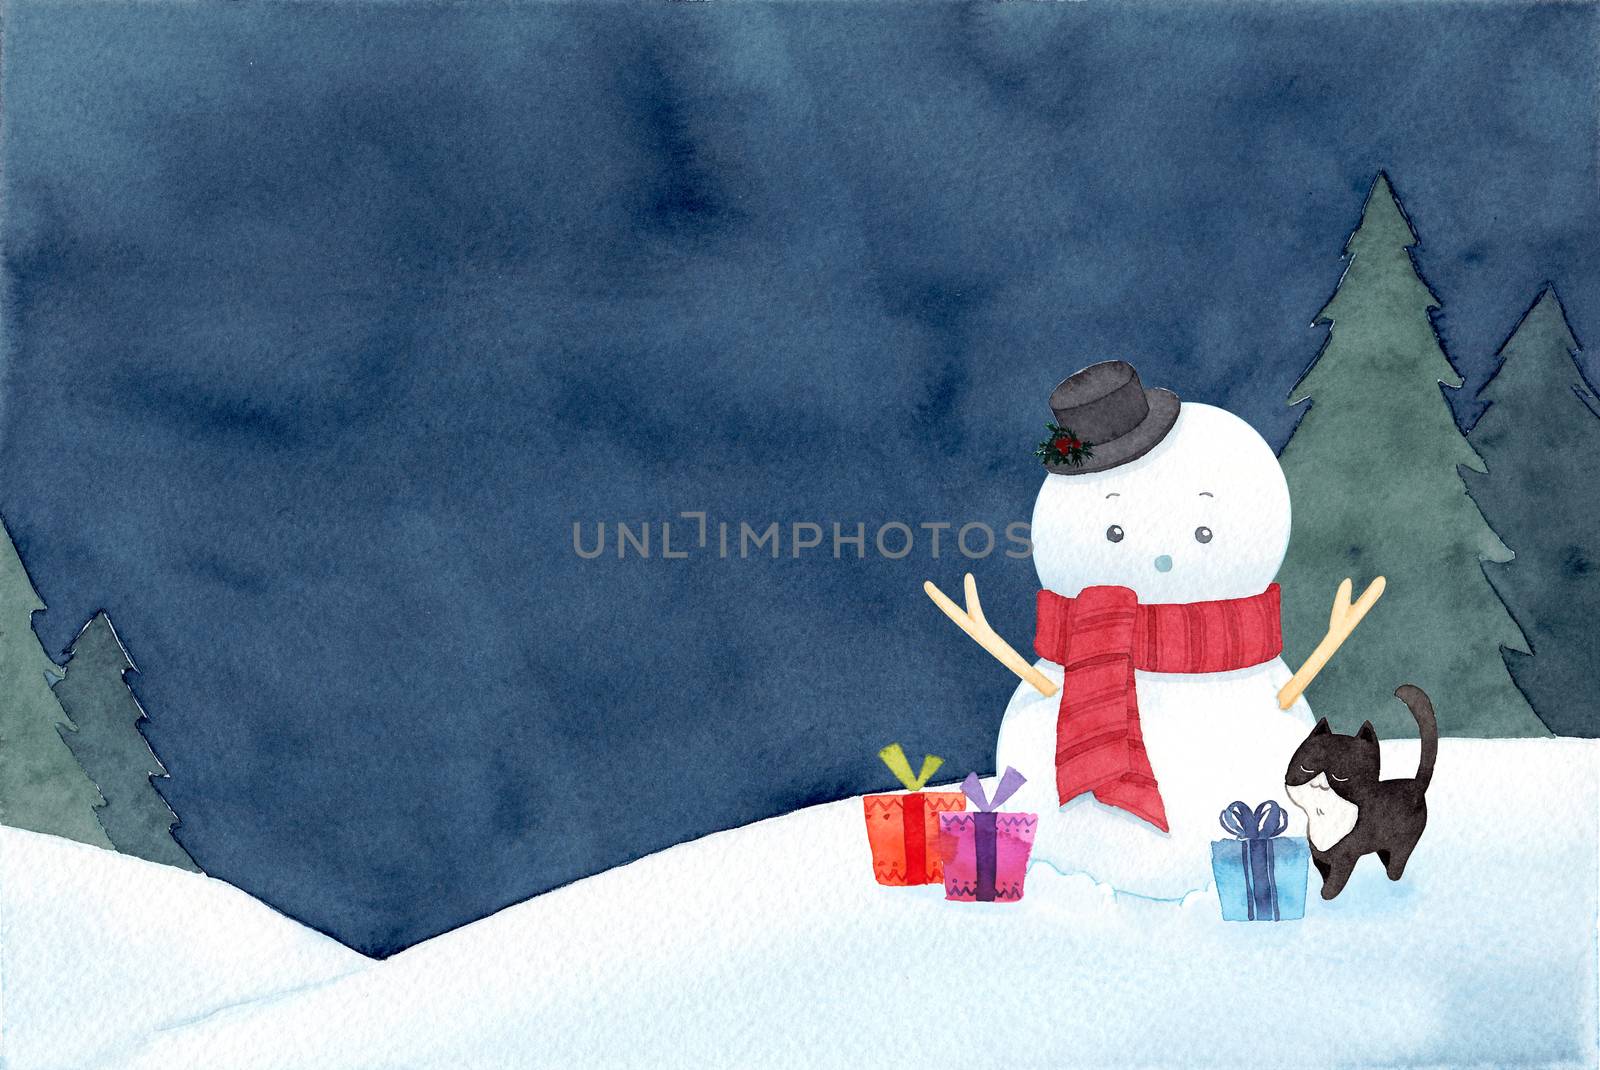 A snowman with hat and red scarf. Calm night winter scenery background. Watercolor hand painting illustration. Design for winter, Christmas, New year. by Ungamrung